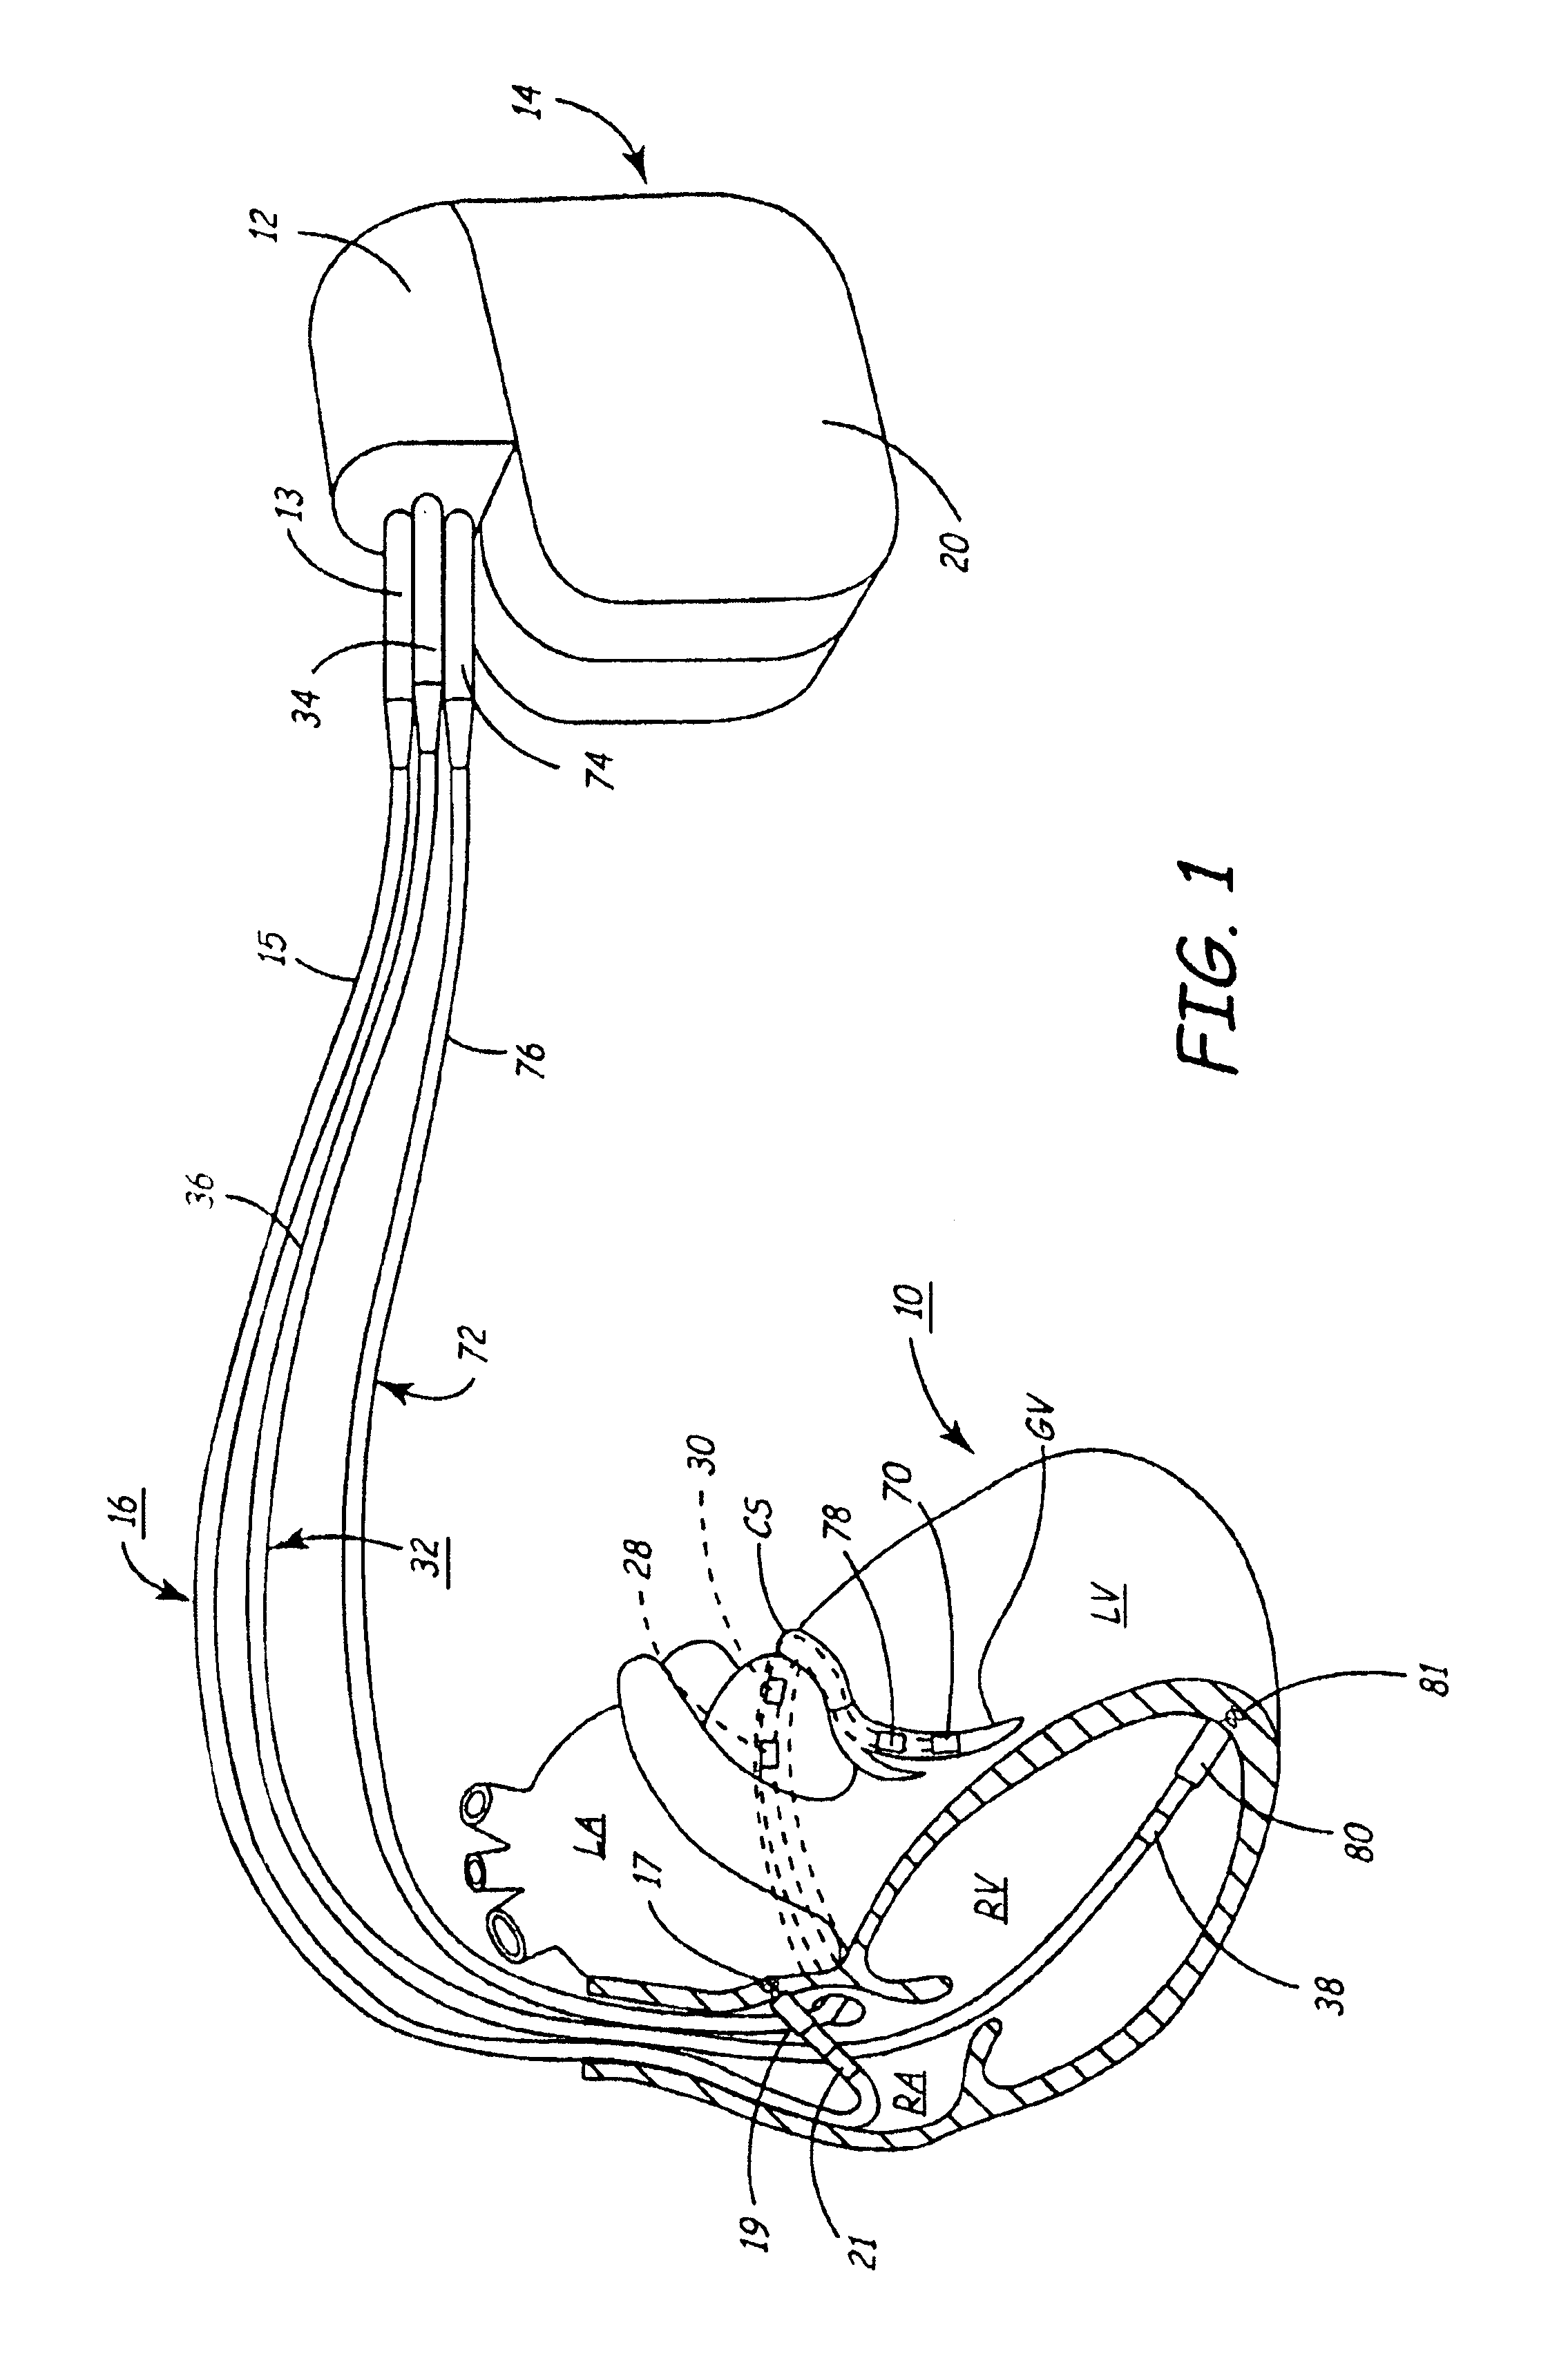 Enhanced method and apparatus to identify and connect a small diameter lead with a low profile lead connector